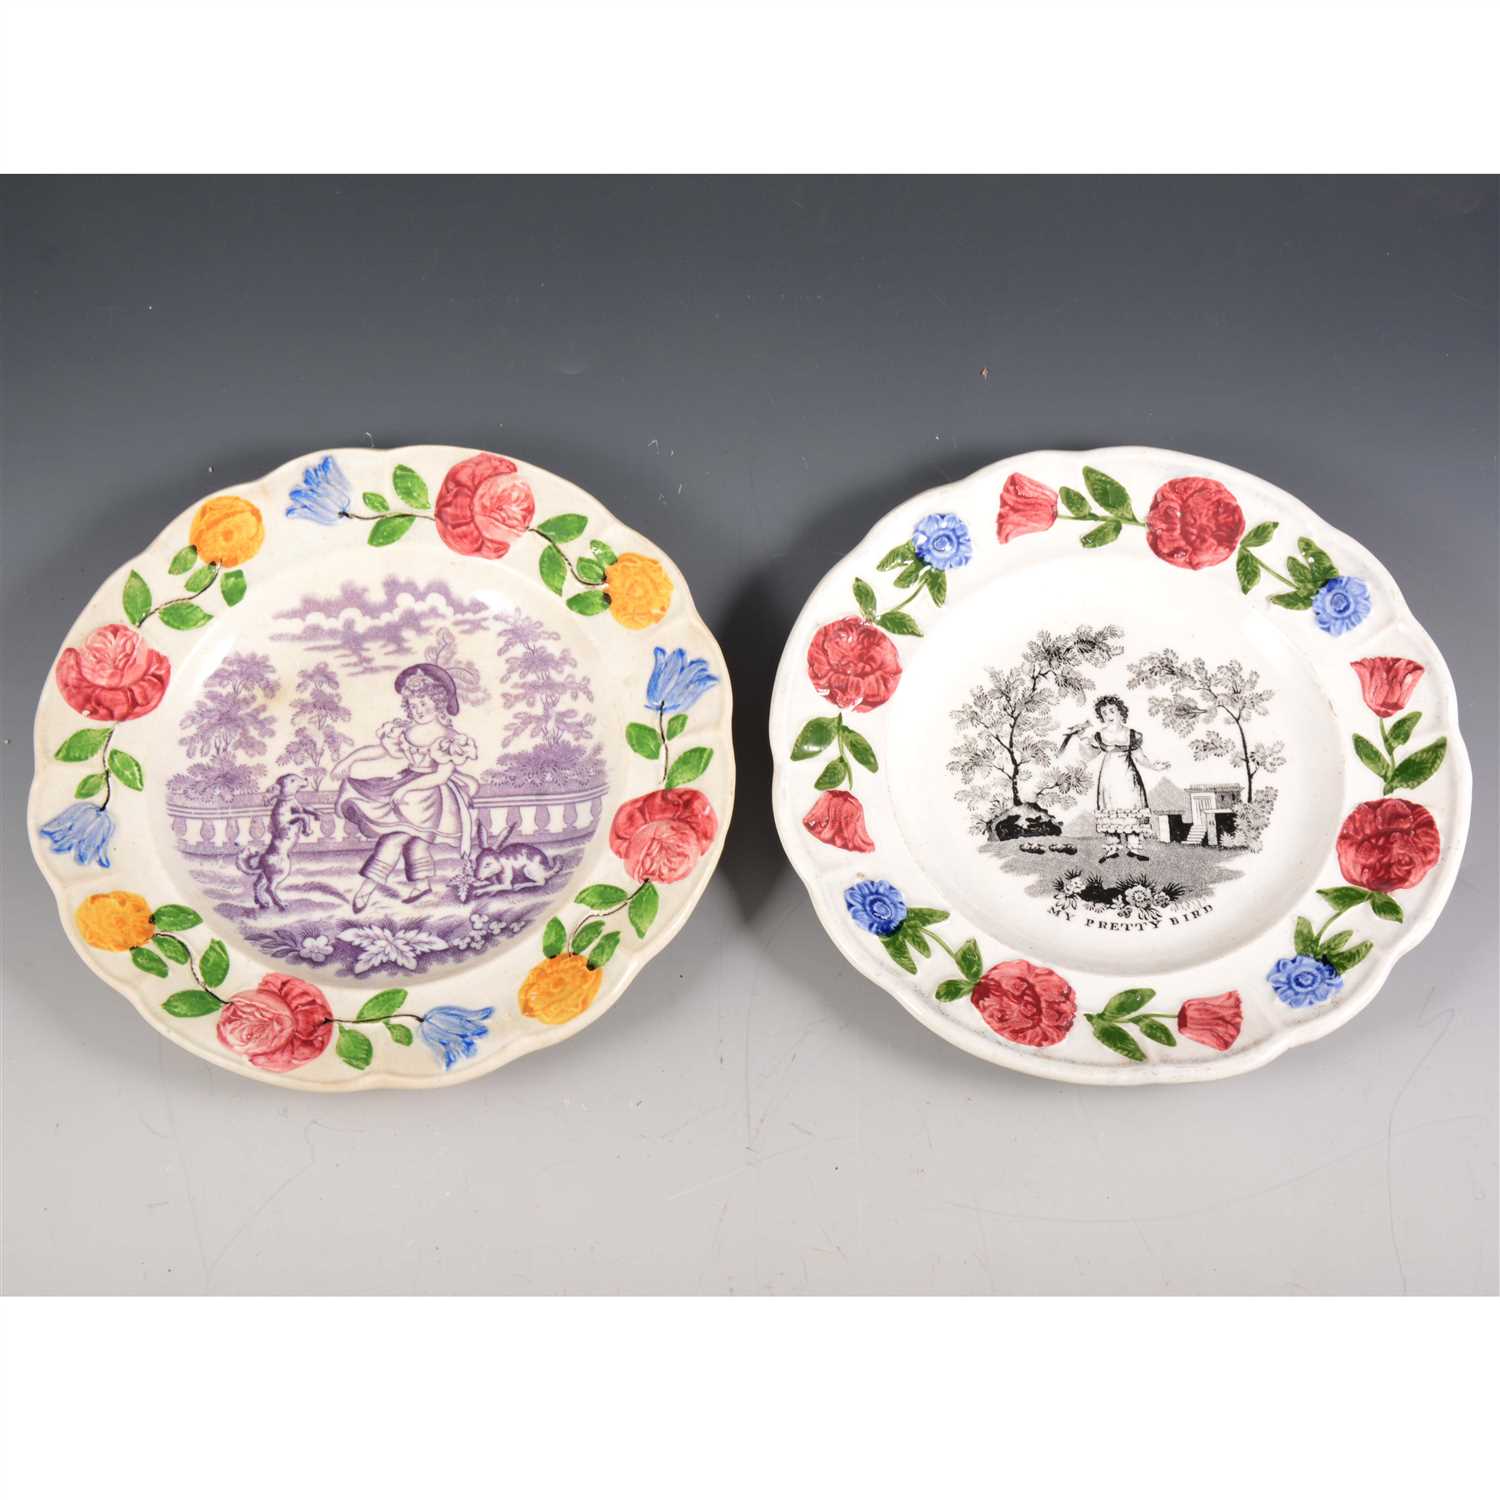 Lot 17 - Two Pearlware type nursery plates, My Pretty Bird, 1830's, and Child dancing